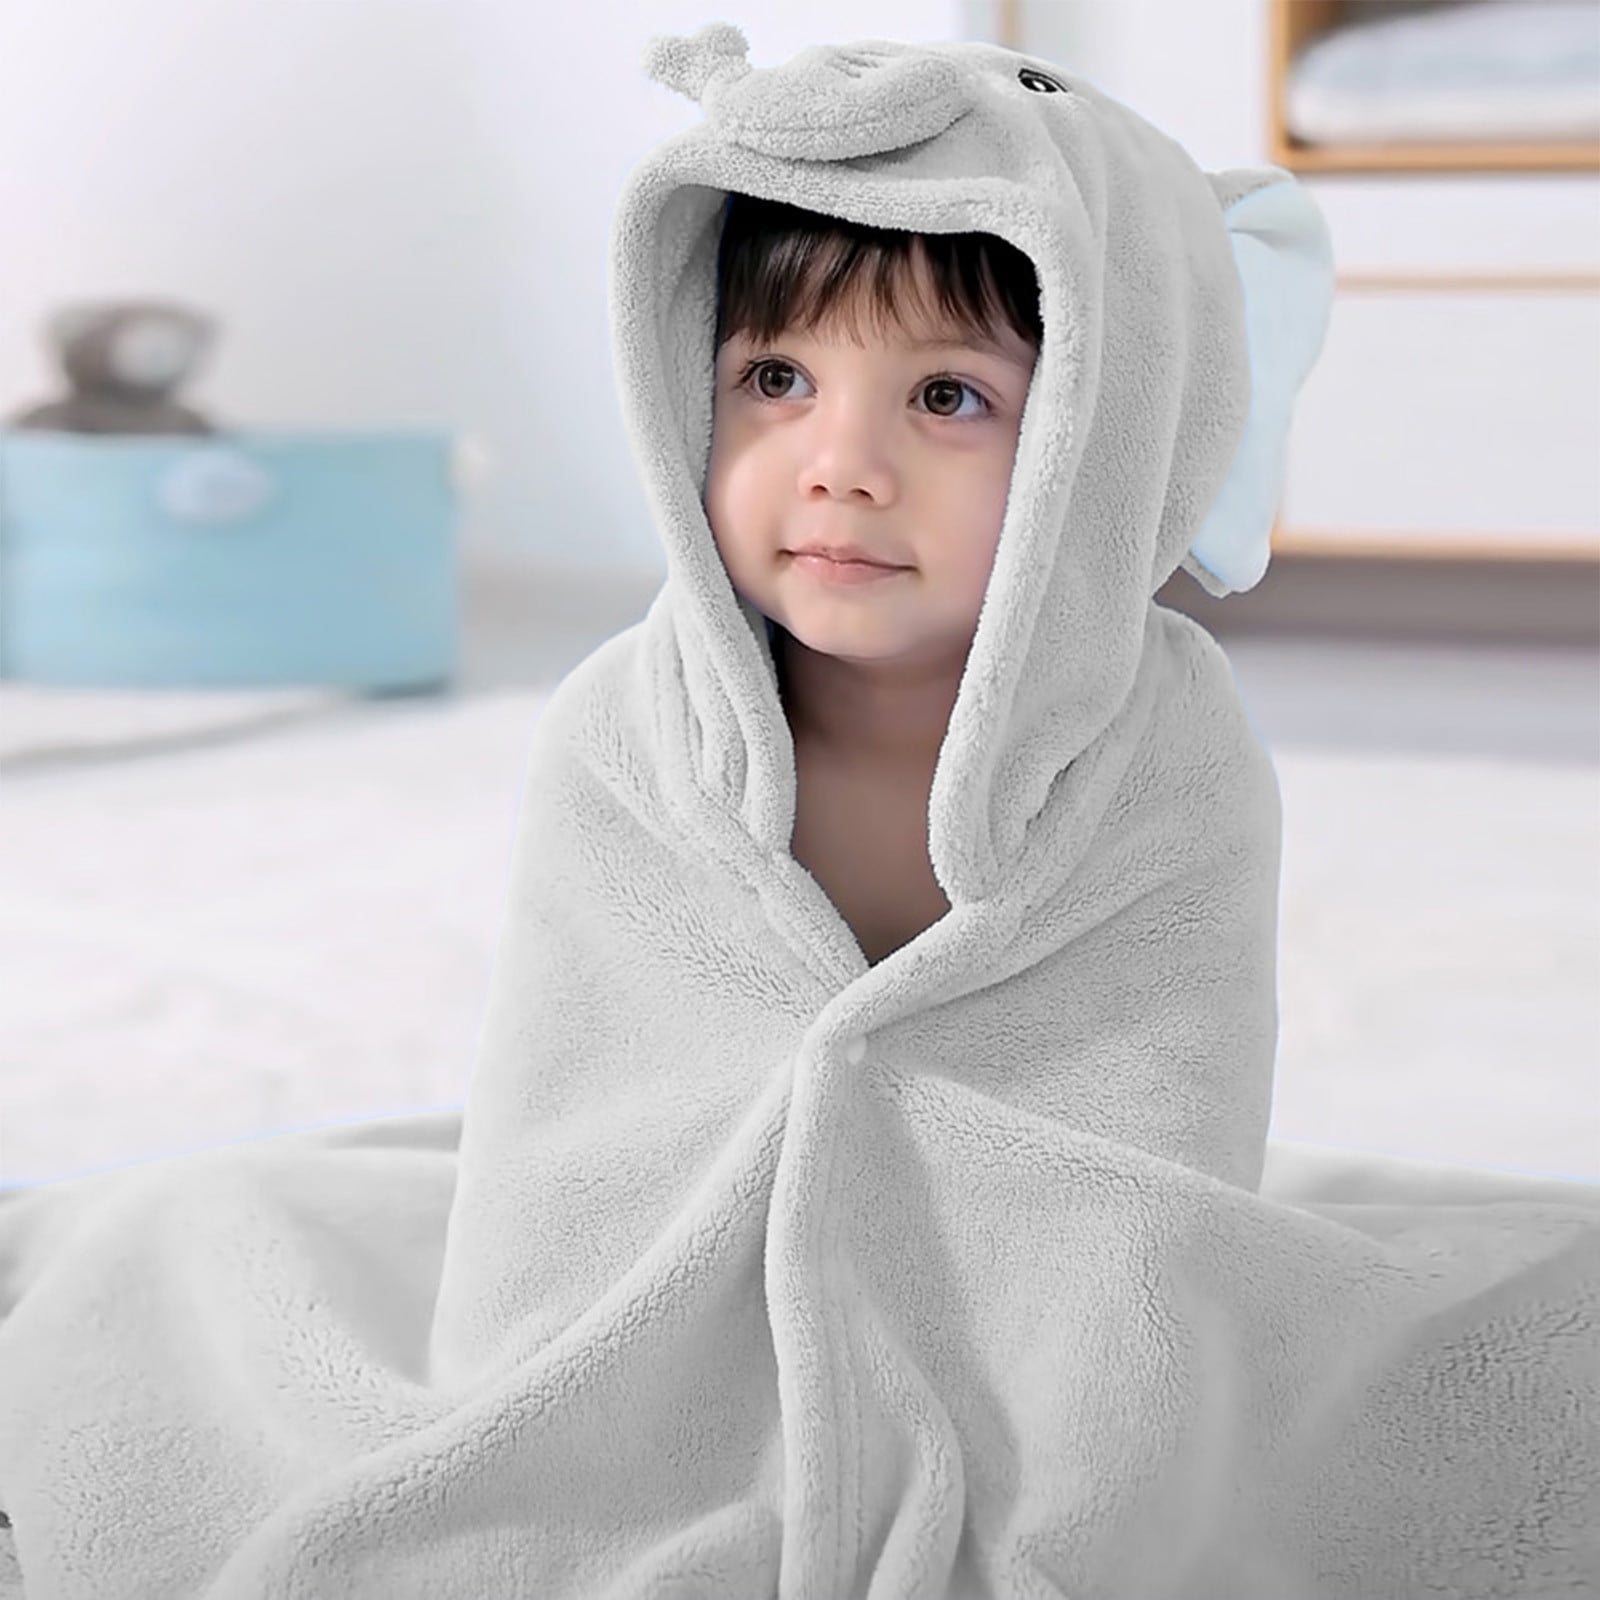 Piglet Hooded Towels for Kids, Winnie the Pooh Bath Towels for